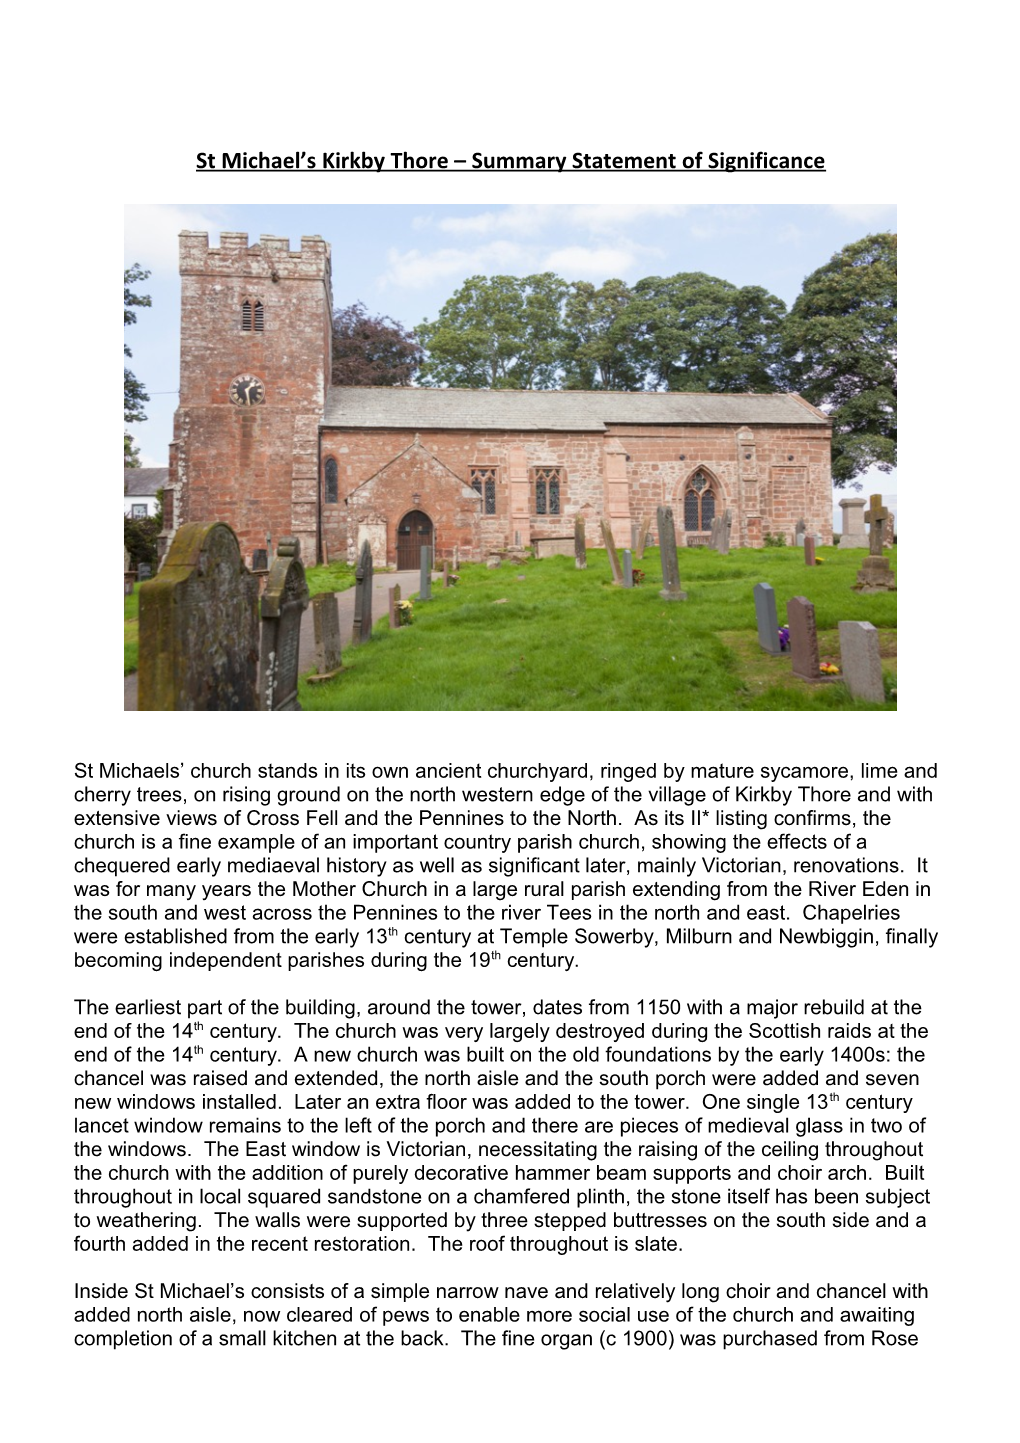 St Michael S Kirkby Thore Statement of Significance